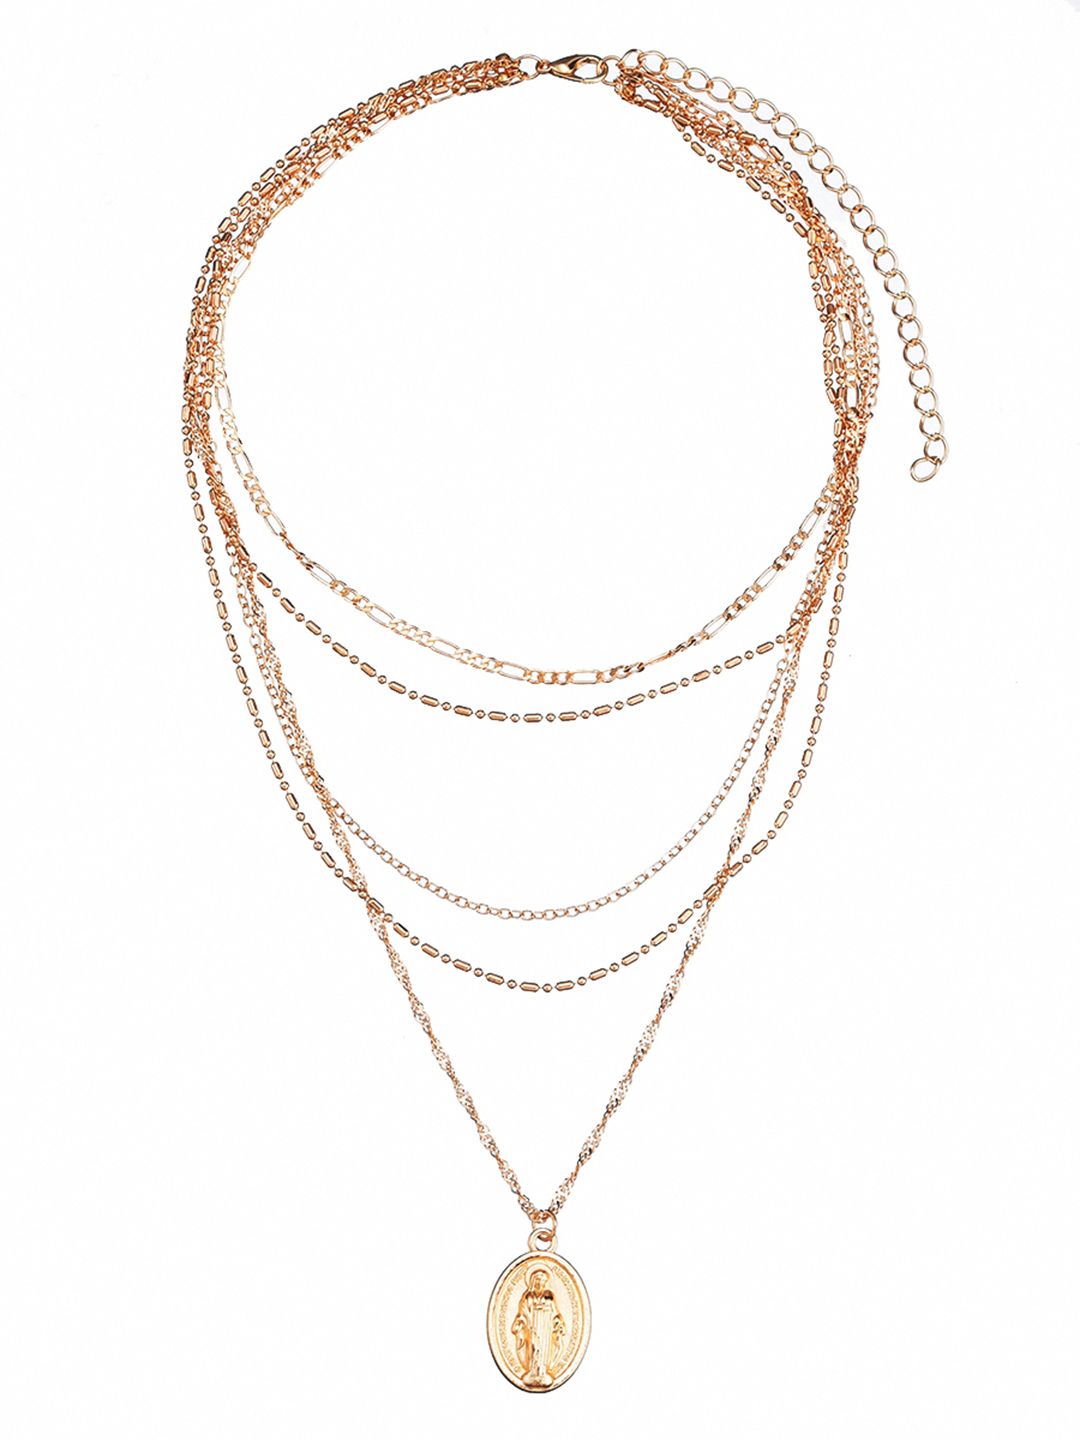 URBANIC Women Gold-Toned Layered Necklace Price in India